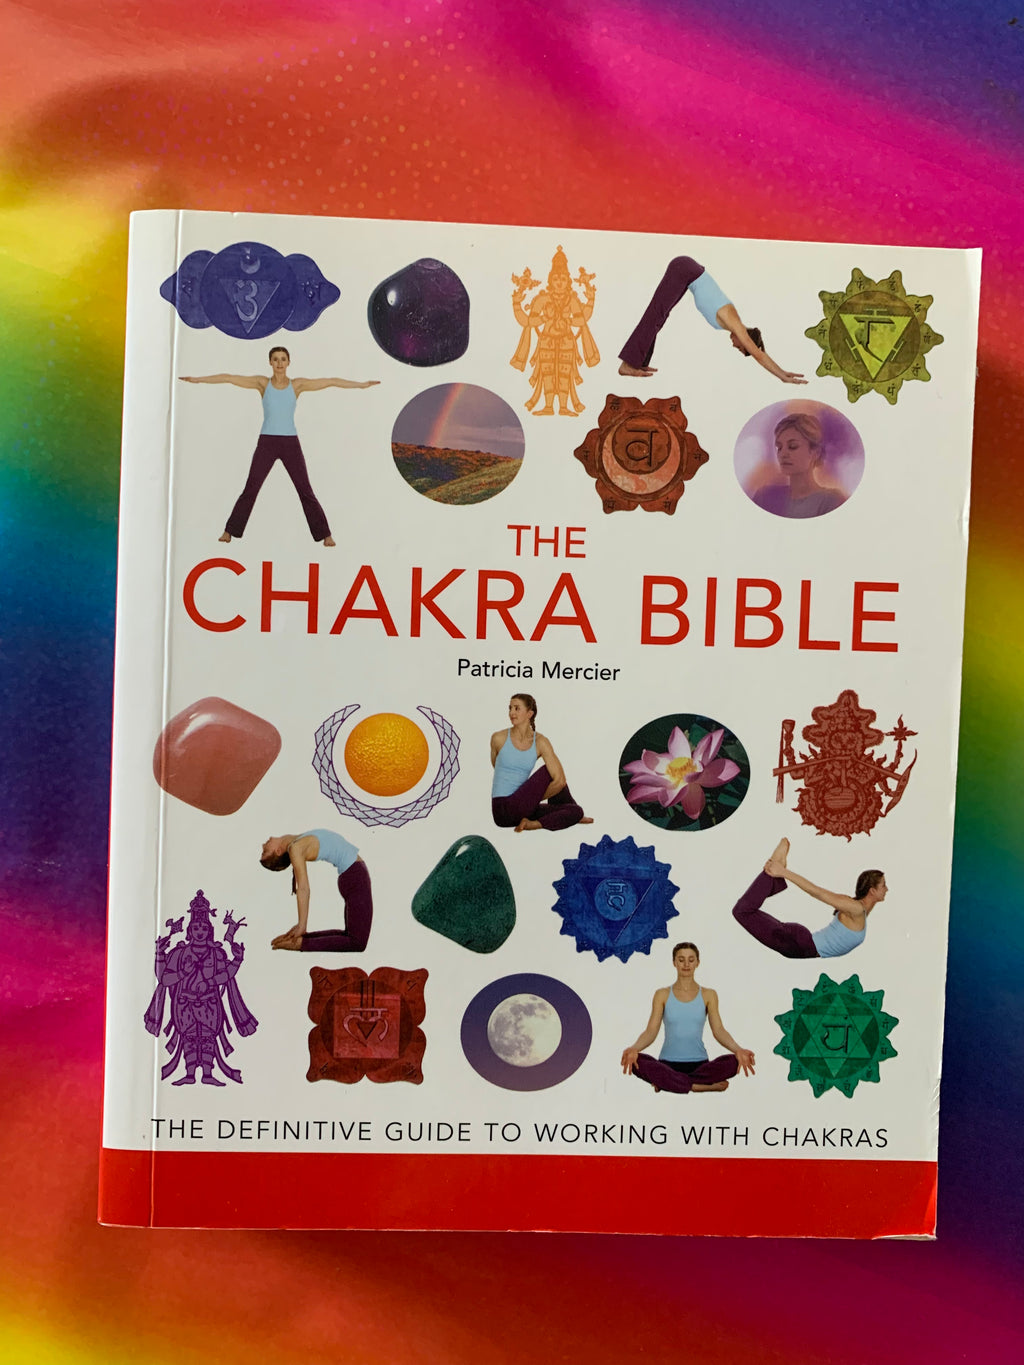 The Chakra Bible: The Definitive Guide to Working with Chakras- By Patricia Mercier